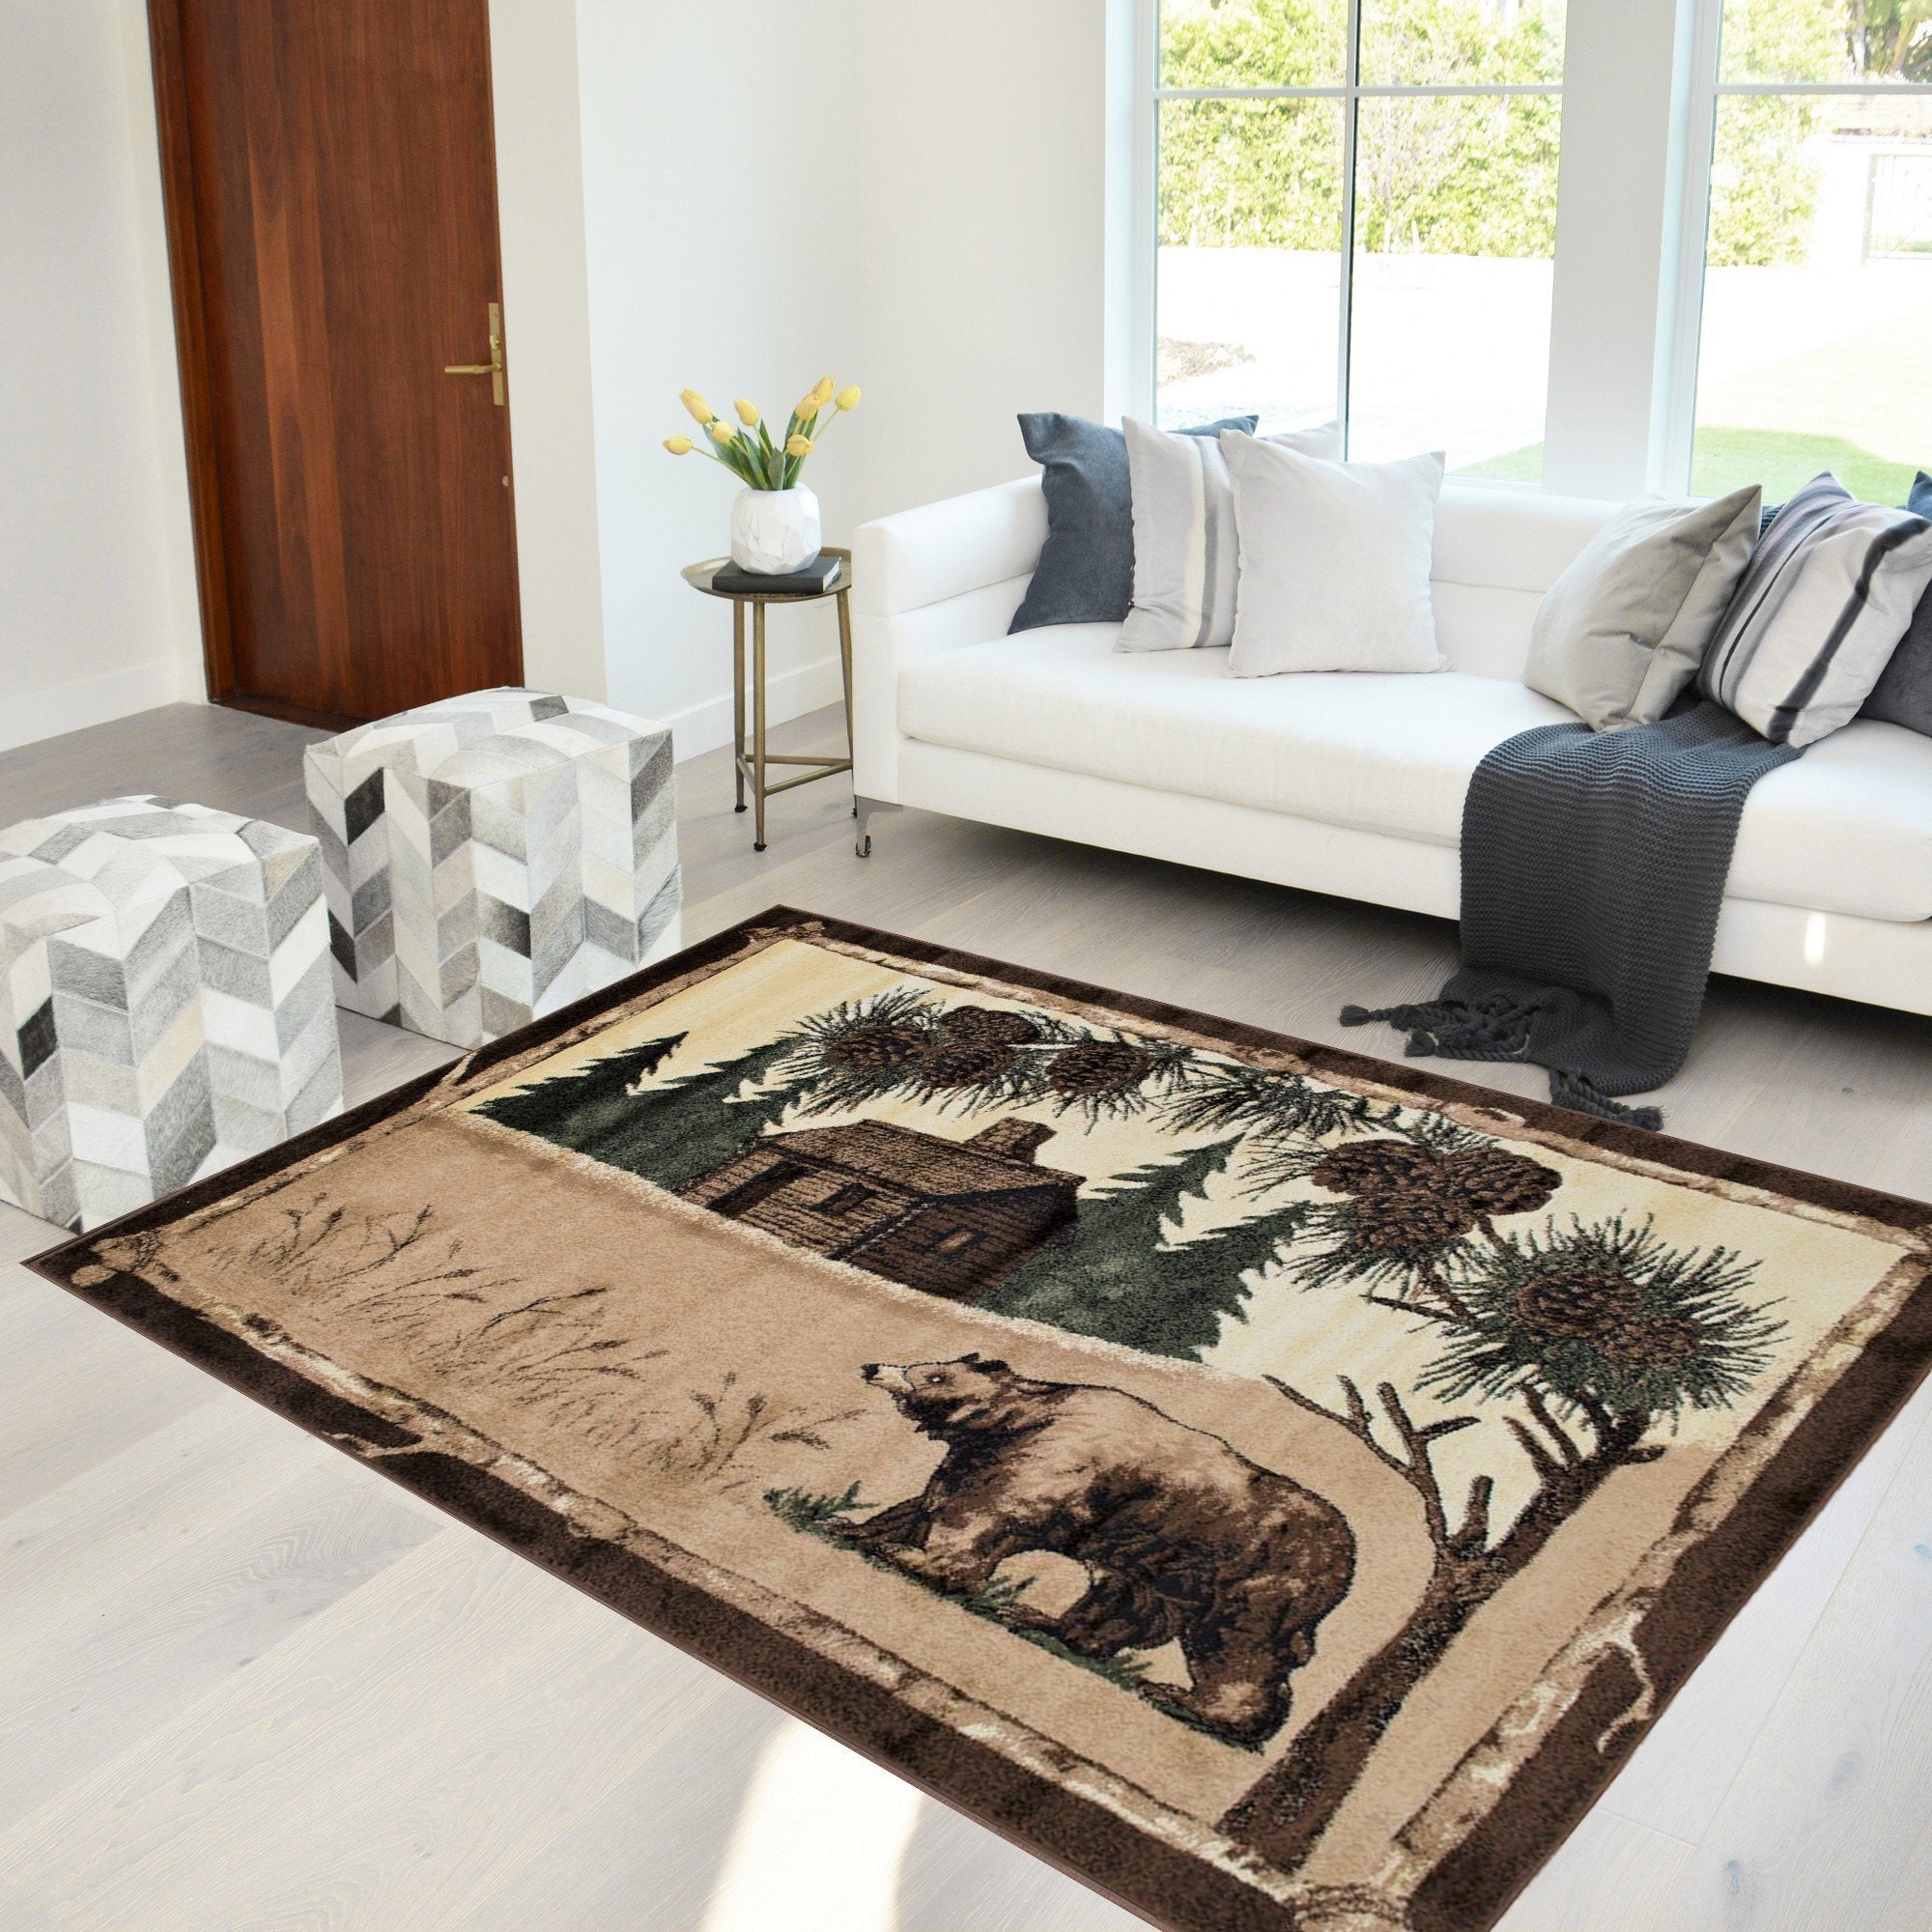 Rustic Cabin Rug Collection Deer Hunting And Fishing Bear Rugs For